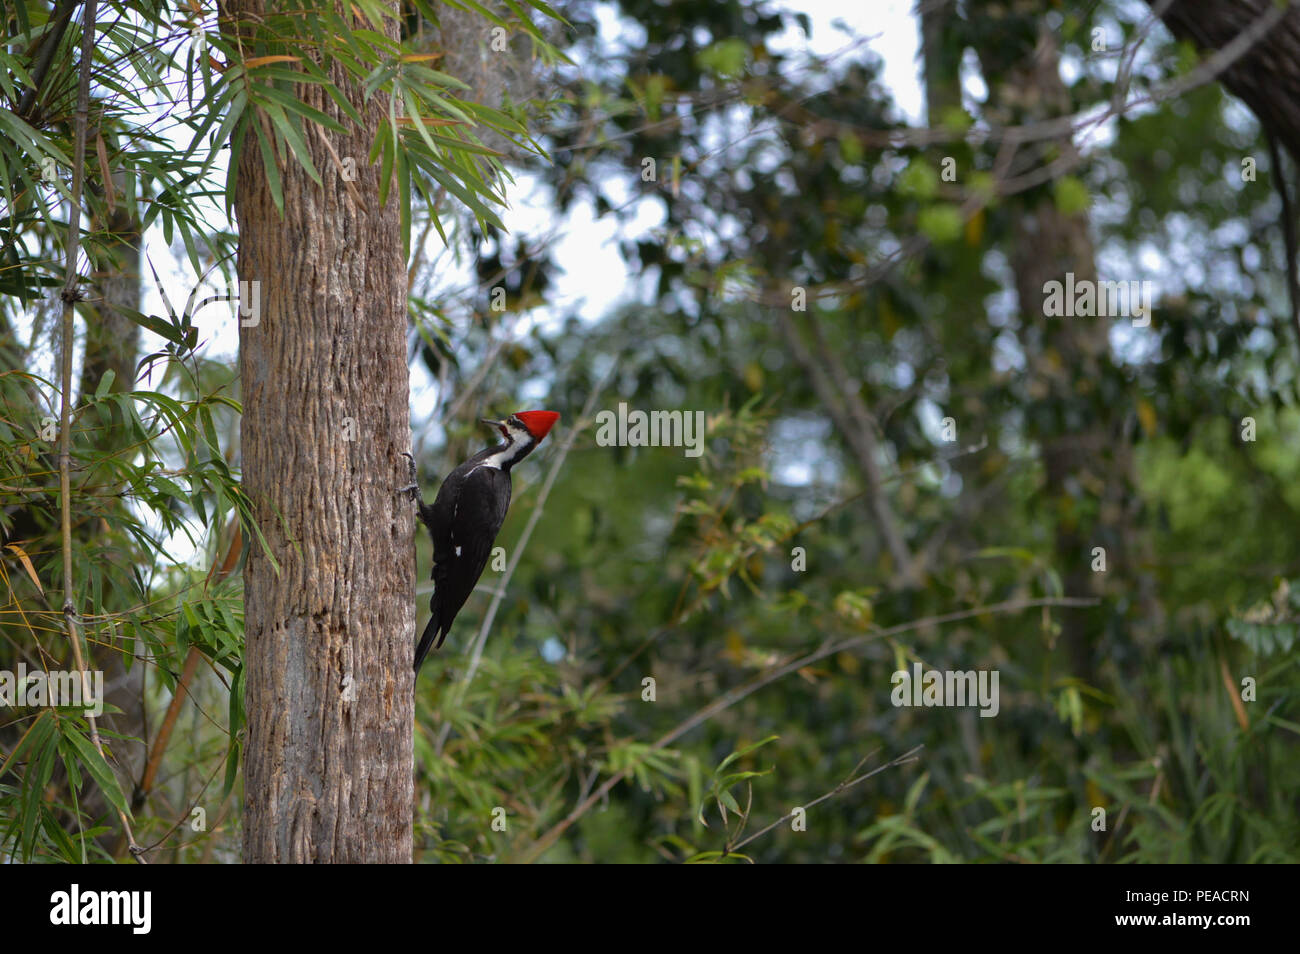 Male Pileated Woodpecker Dryocopus pileatus Largest Common Woodpecker In North America Flaming Crest Nature Outdoors Environment Florida Wildlife Stock Photo